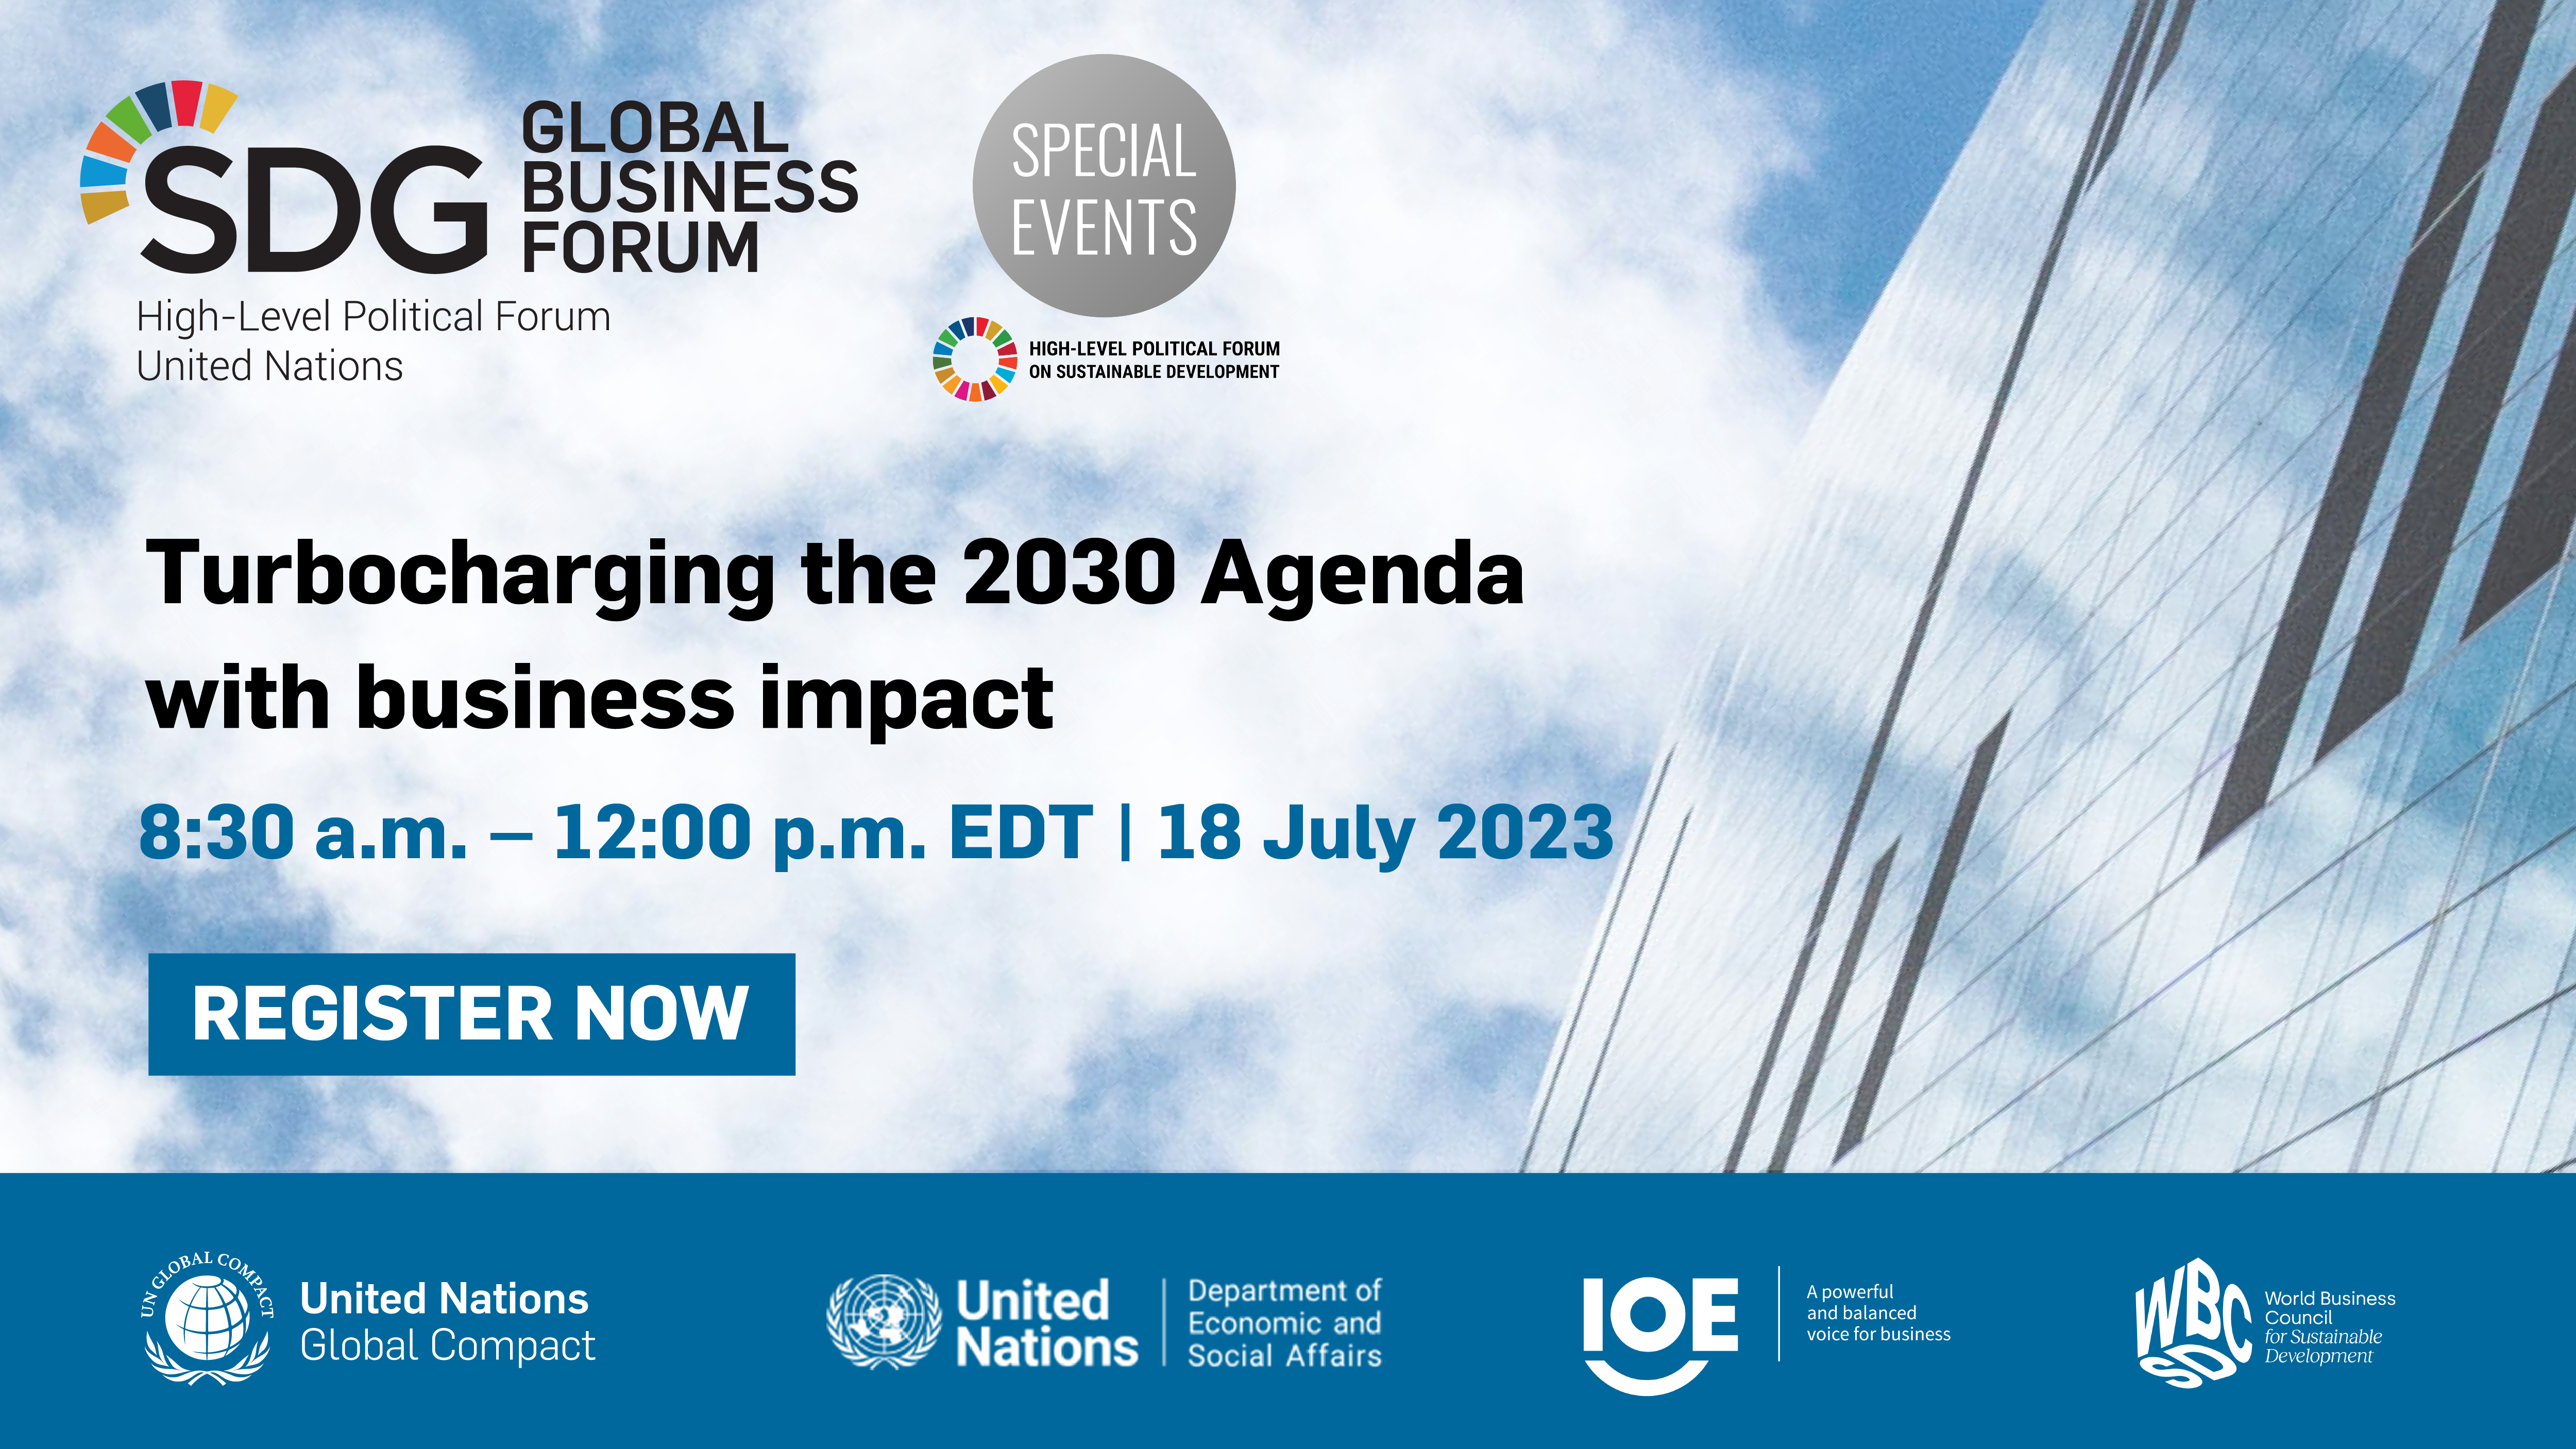 Taking place during the HLPF, the 2023 SDG Business Forum will provide a multi-stakeholder platform to accelerate sustainable development by 2030.